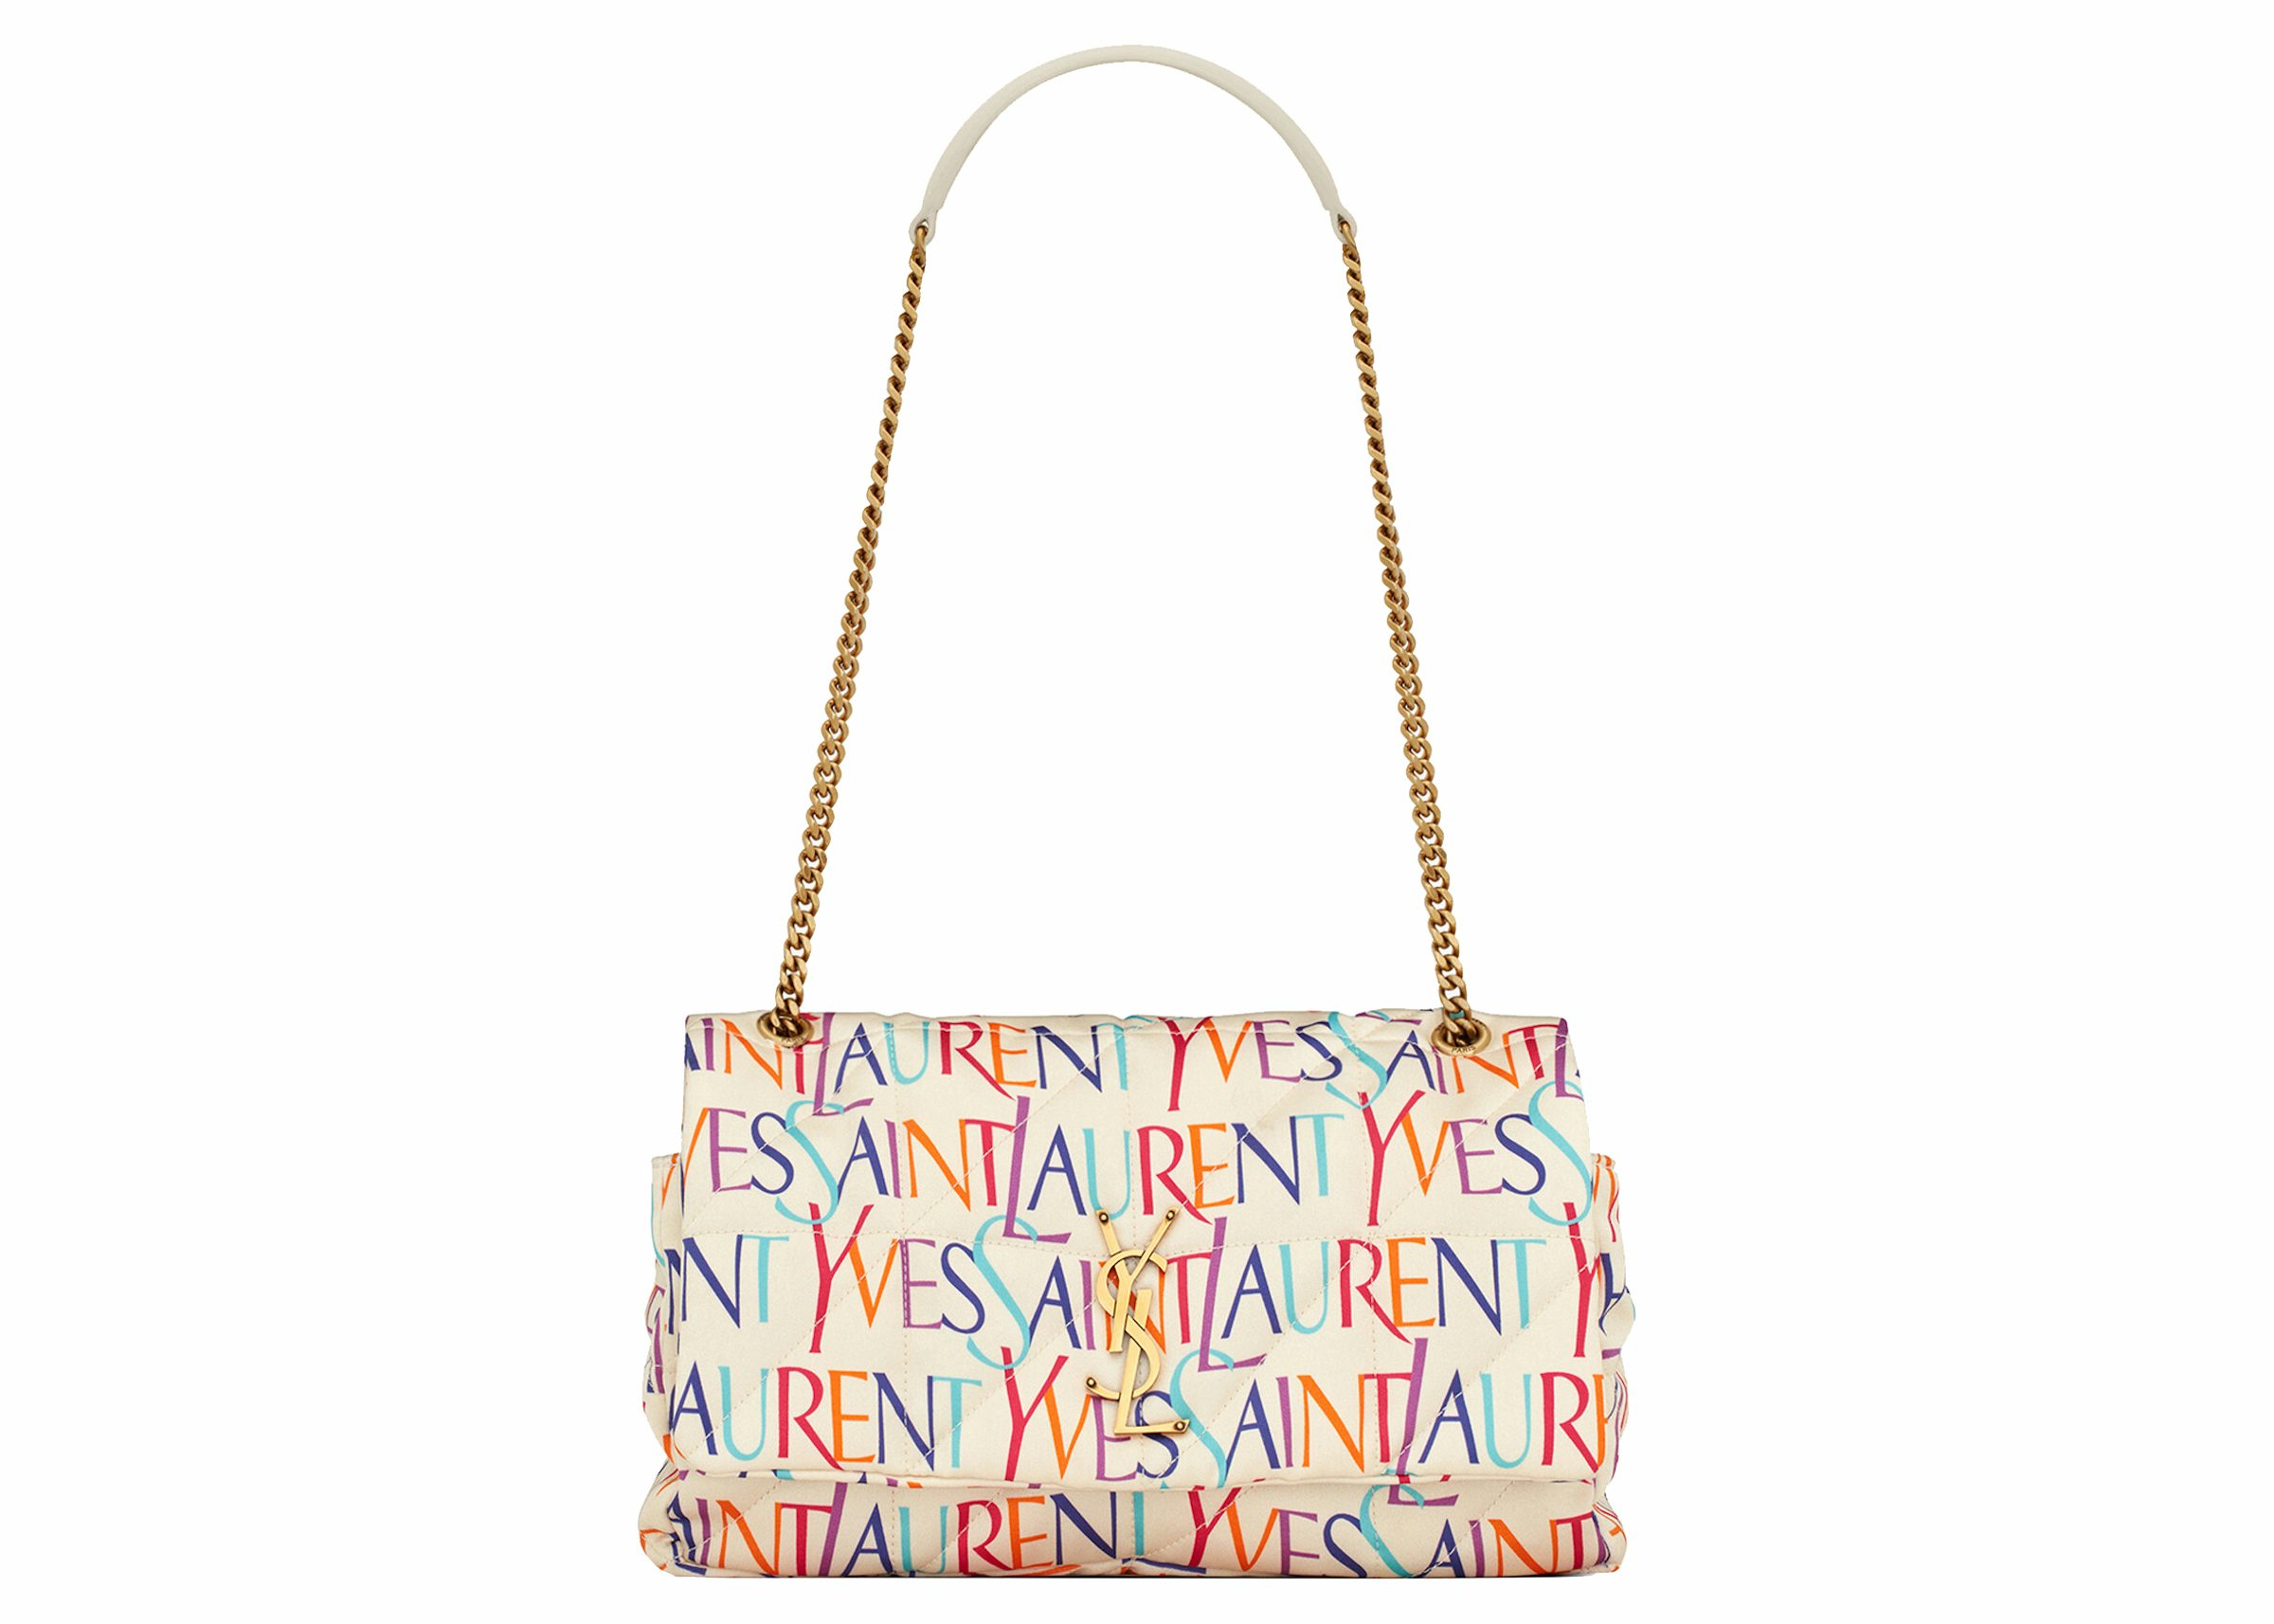 Saint Laurent Monogram All Over Tote In Canvas And Smooth Leather in  Natural